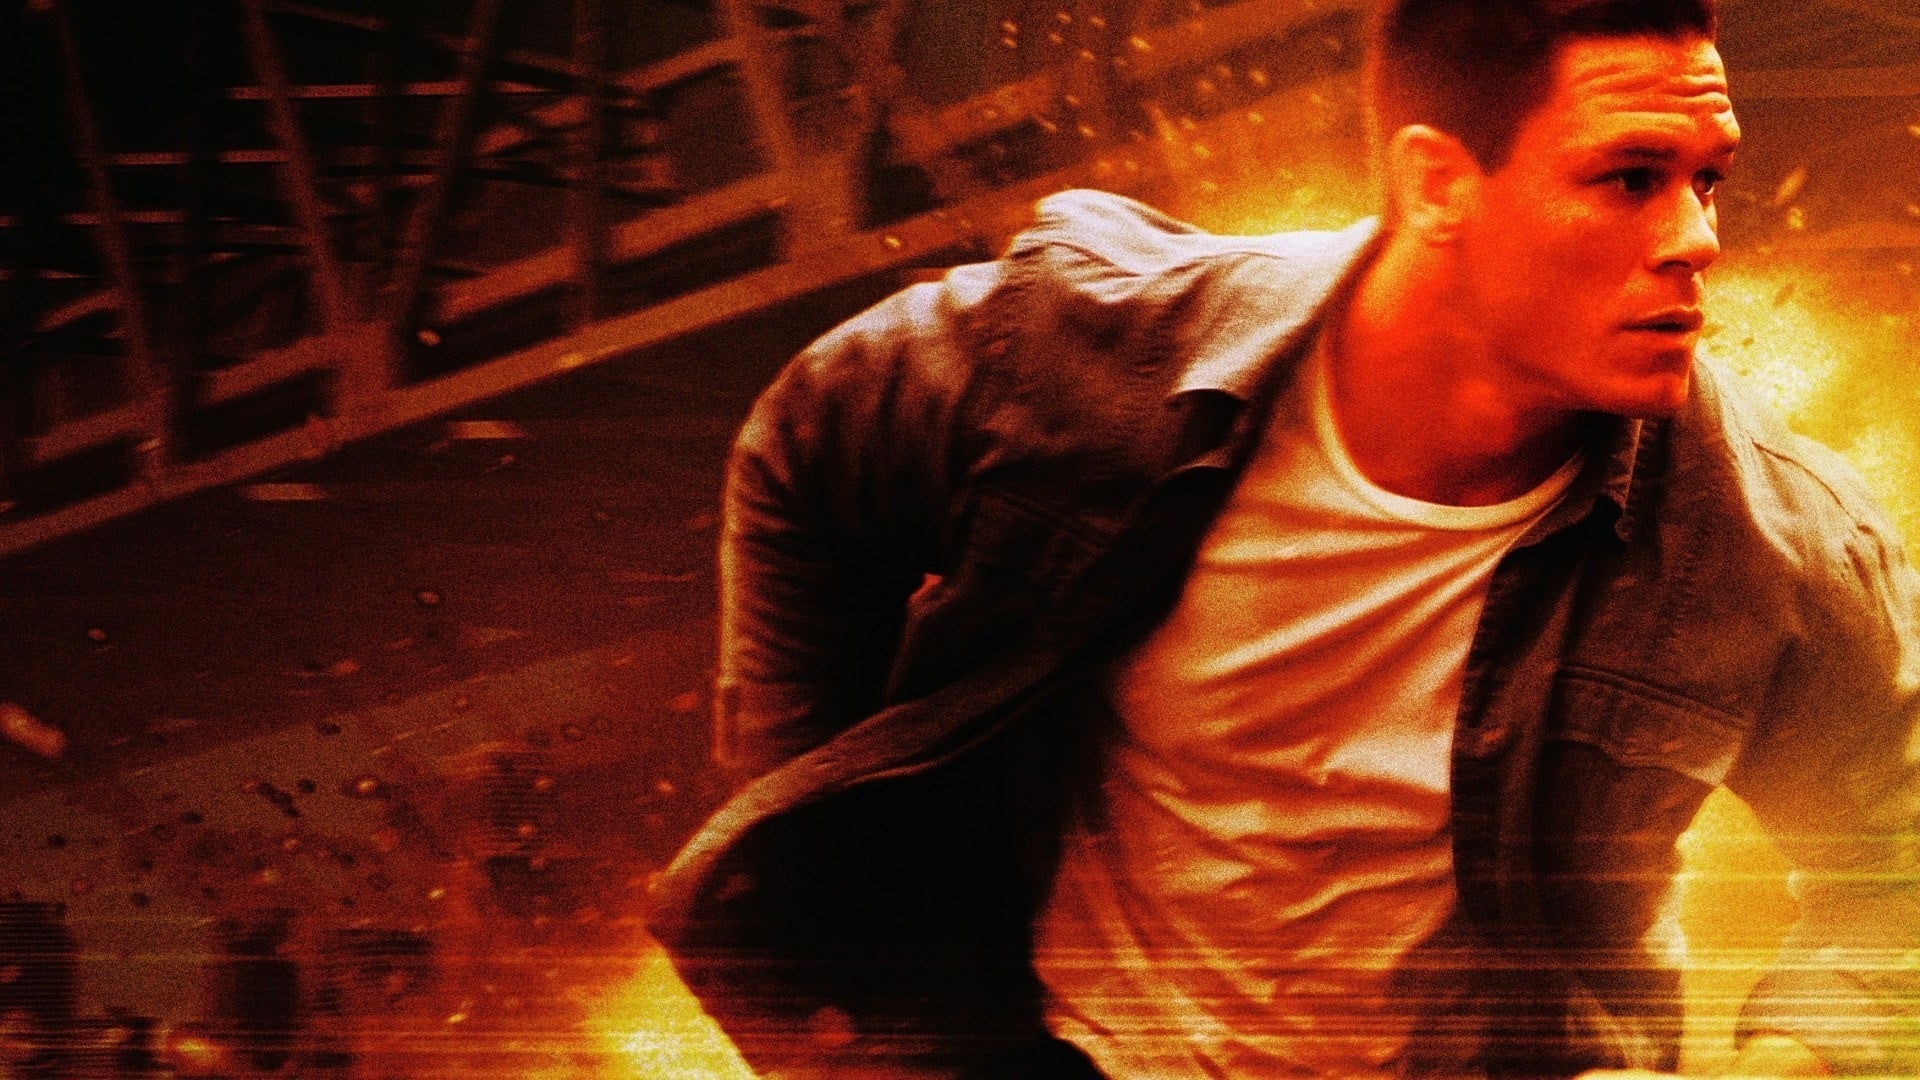 12 Rounds 2: Reloaded - Where to Watch and Stream Online